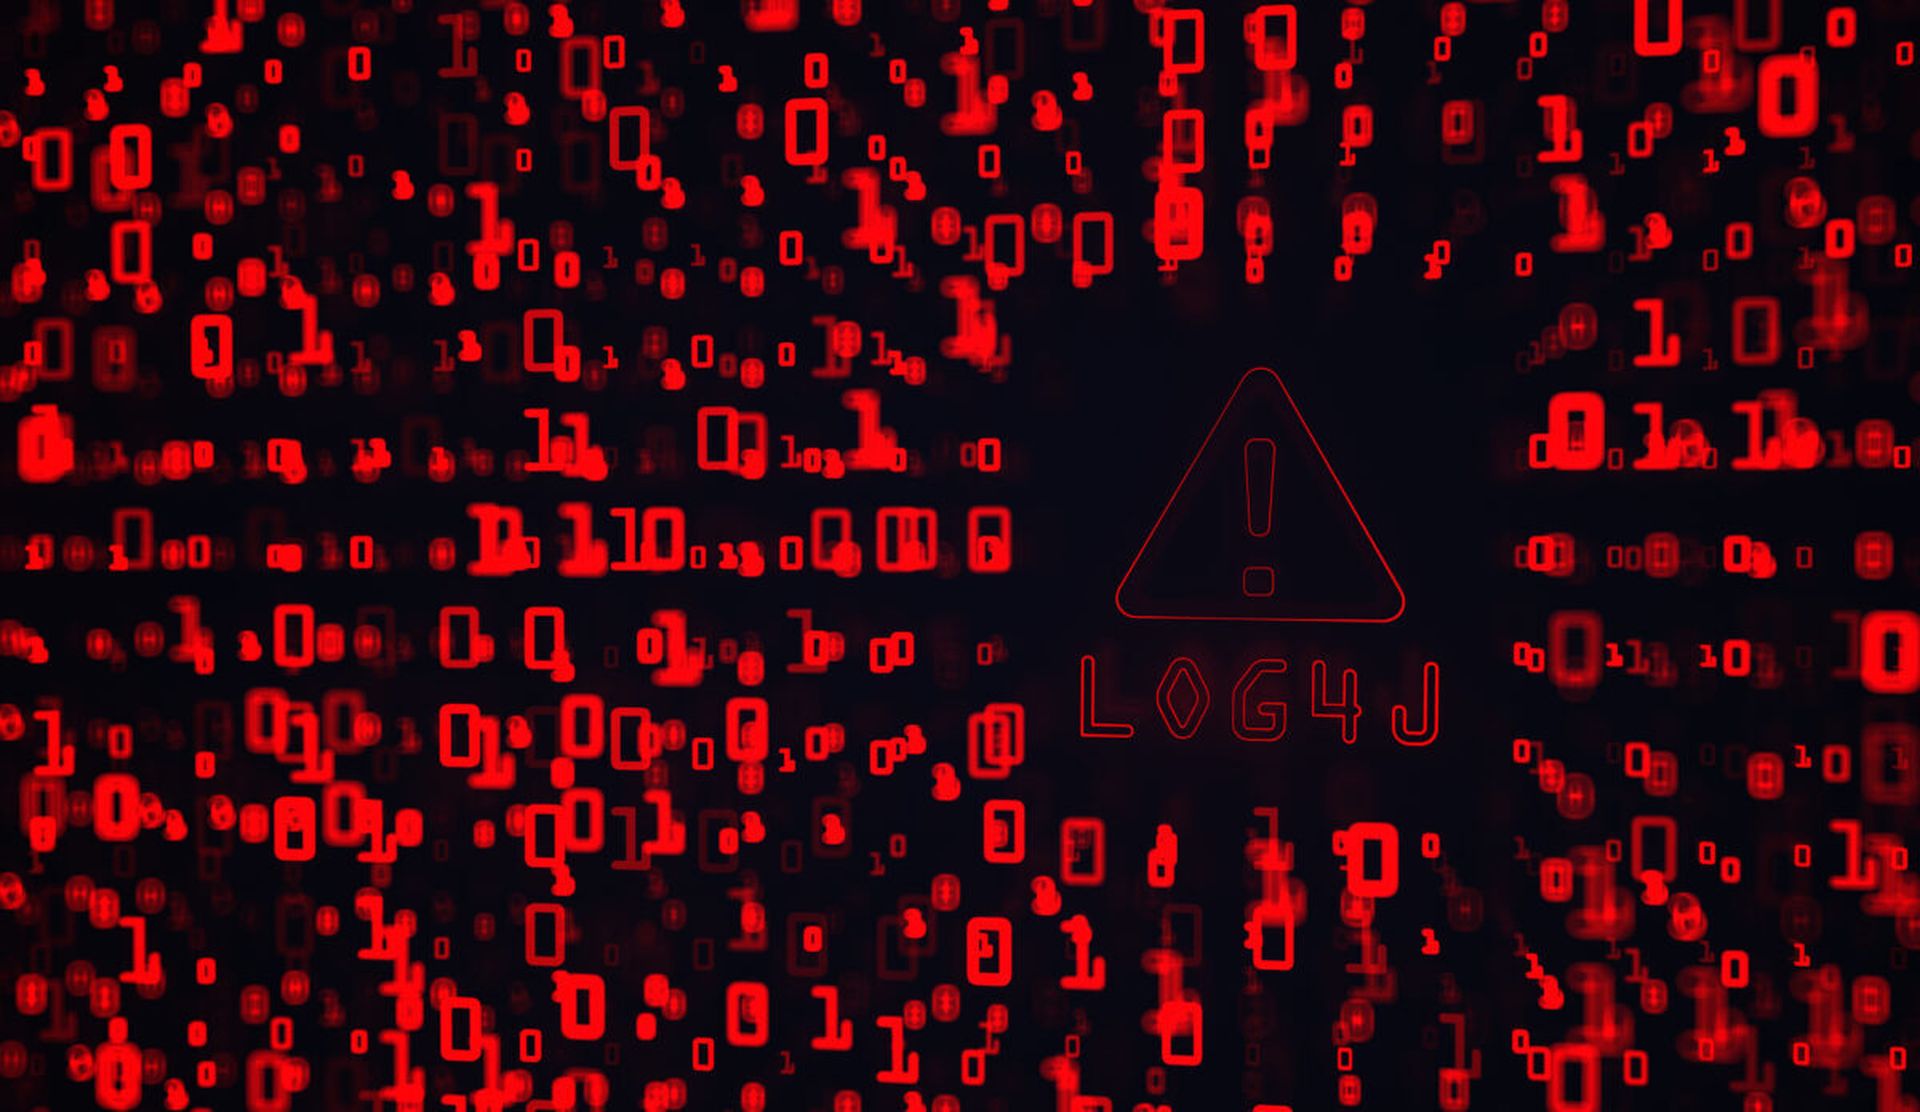 One year after the Log4Shell vulnerability was discovered, researchers tell SC Media that widespread exposure remains rampant as the sky-high costs of detection and remediation start to come into focus. (Image credit: style-photography via Getty)